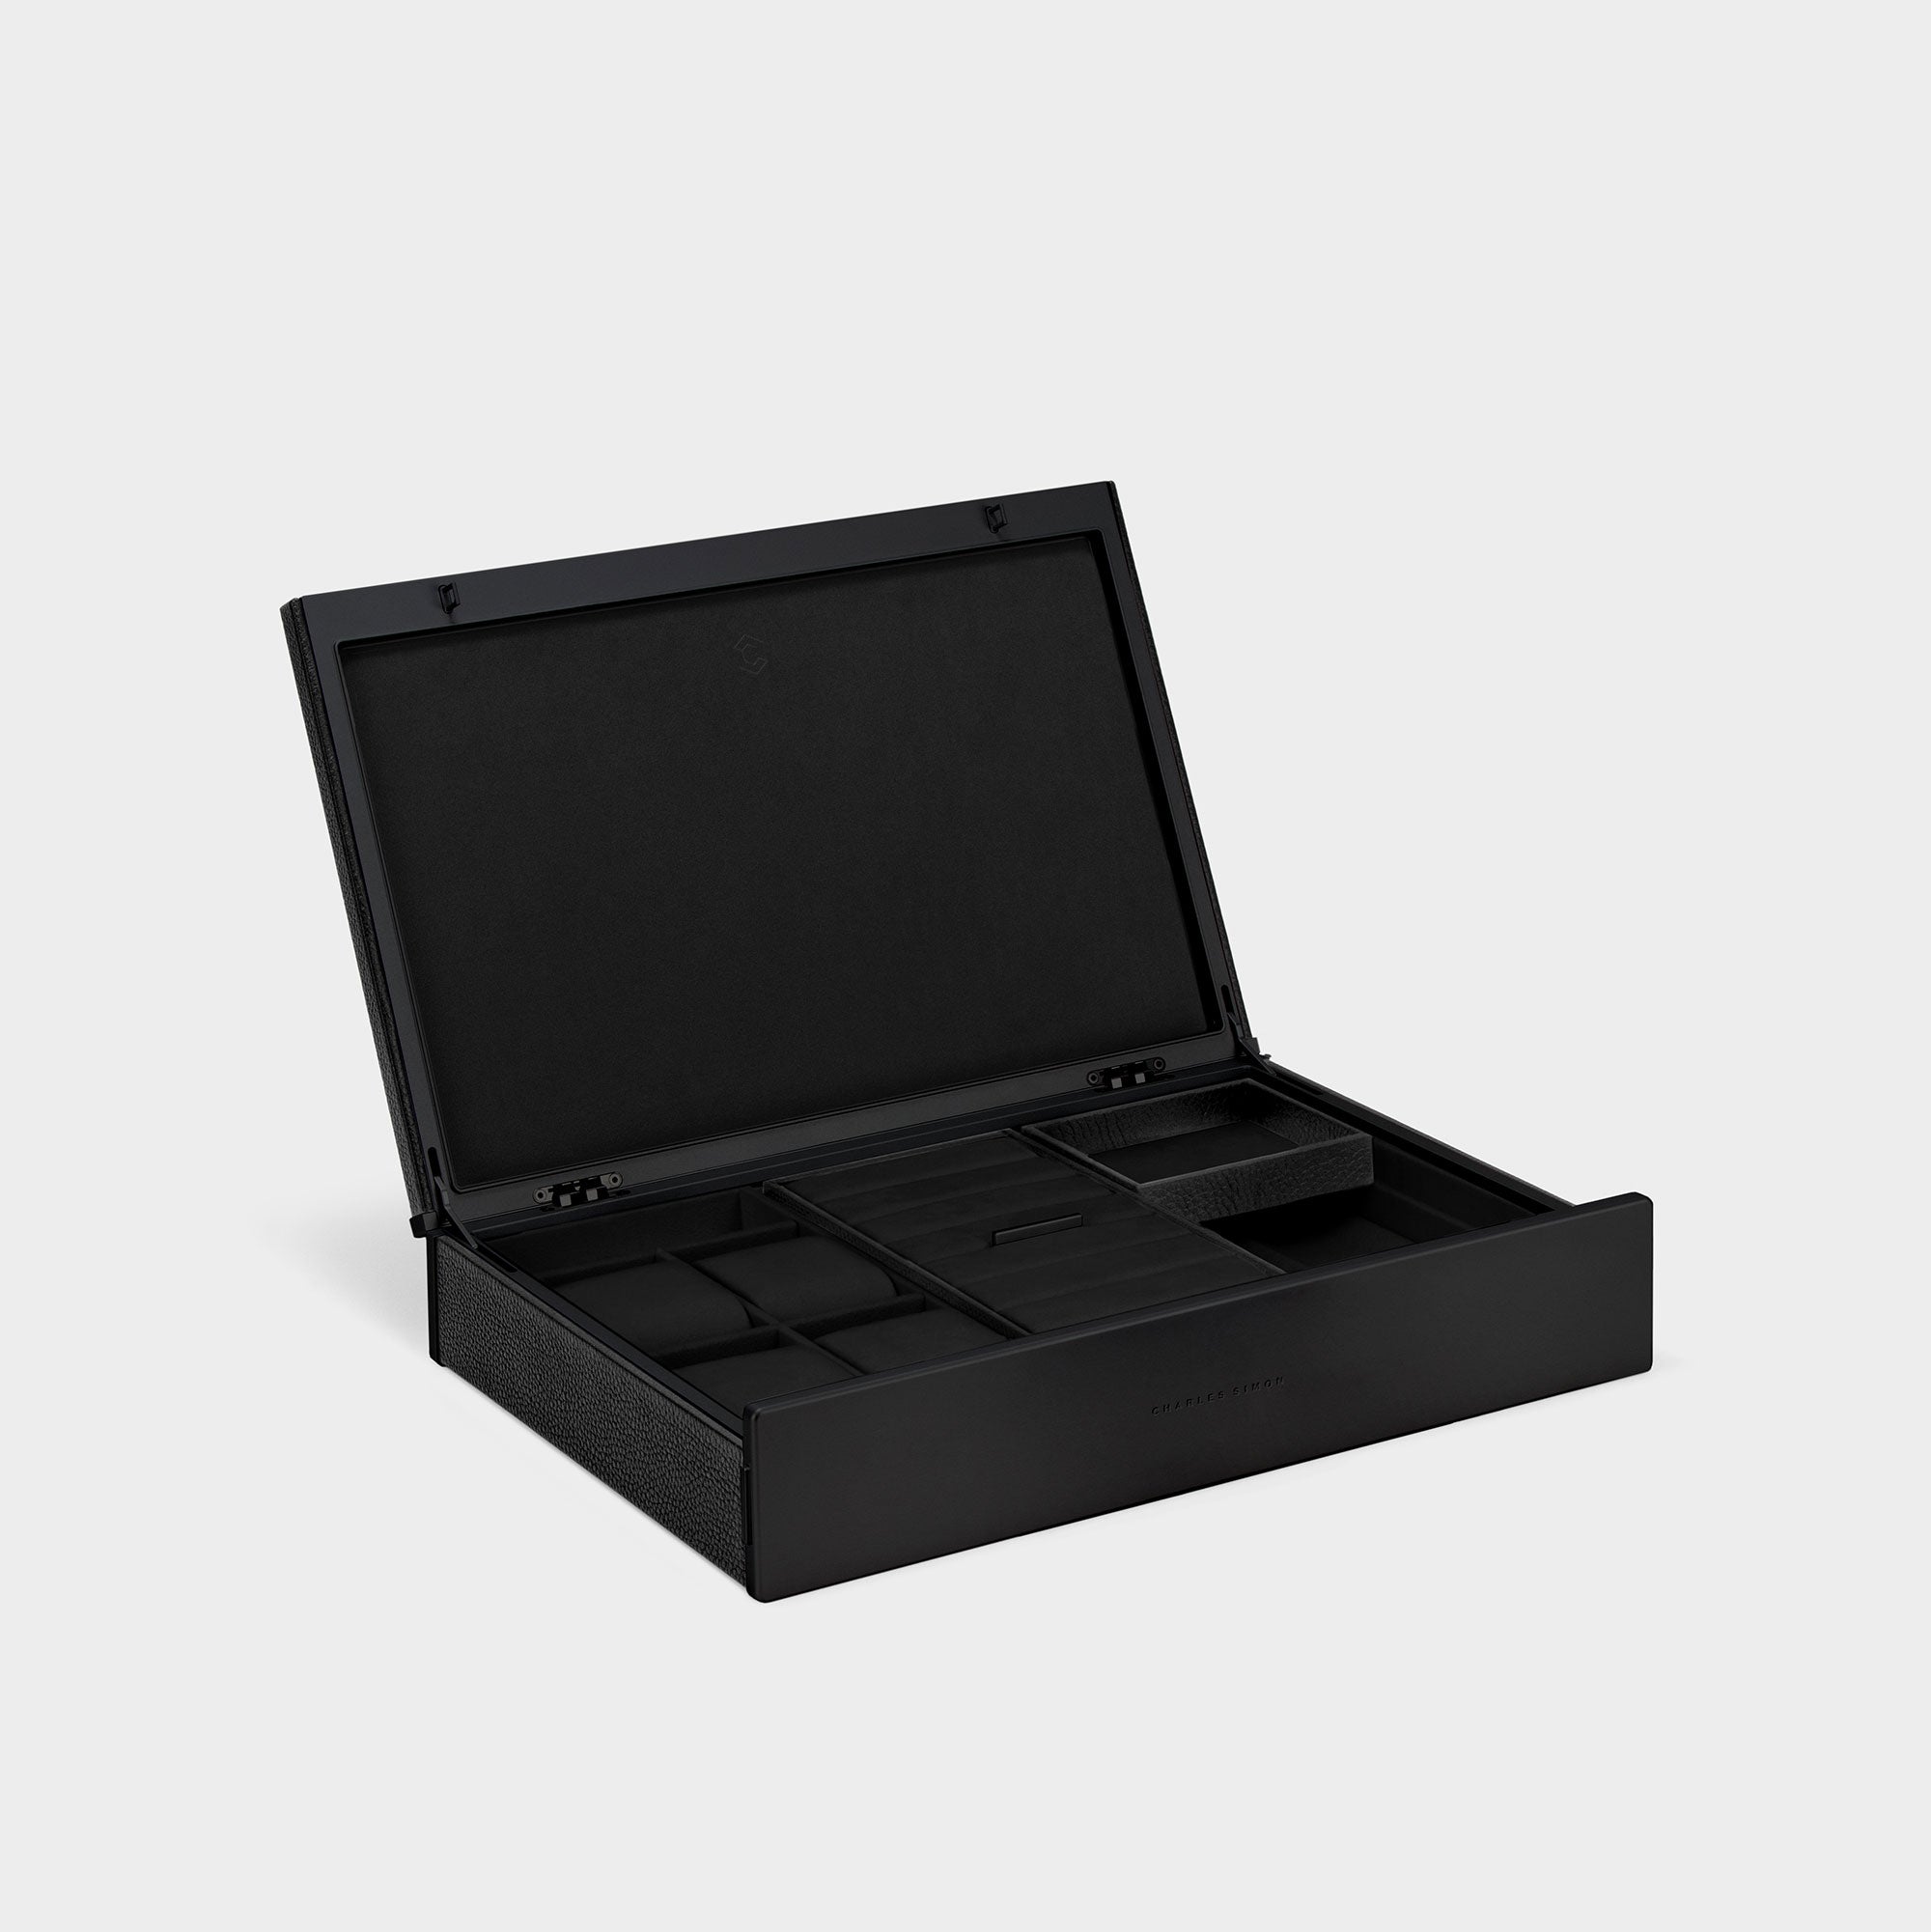 Product photo of all black Taylor 4 Watch and Jewelry box for practical watch storage and jewelry organization. Accommodates rings, necklaces, jewelry, earrings and up to 4 watches